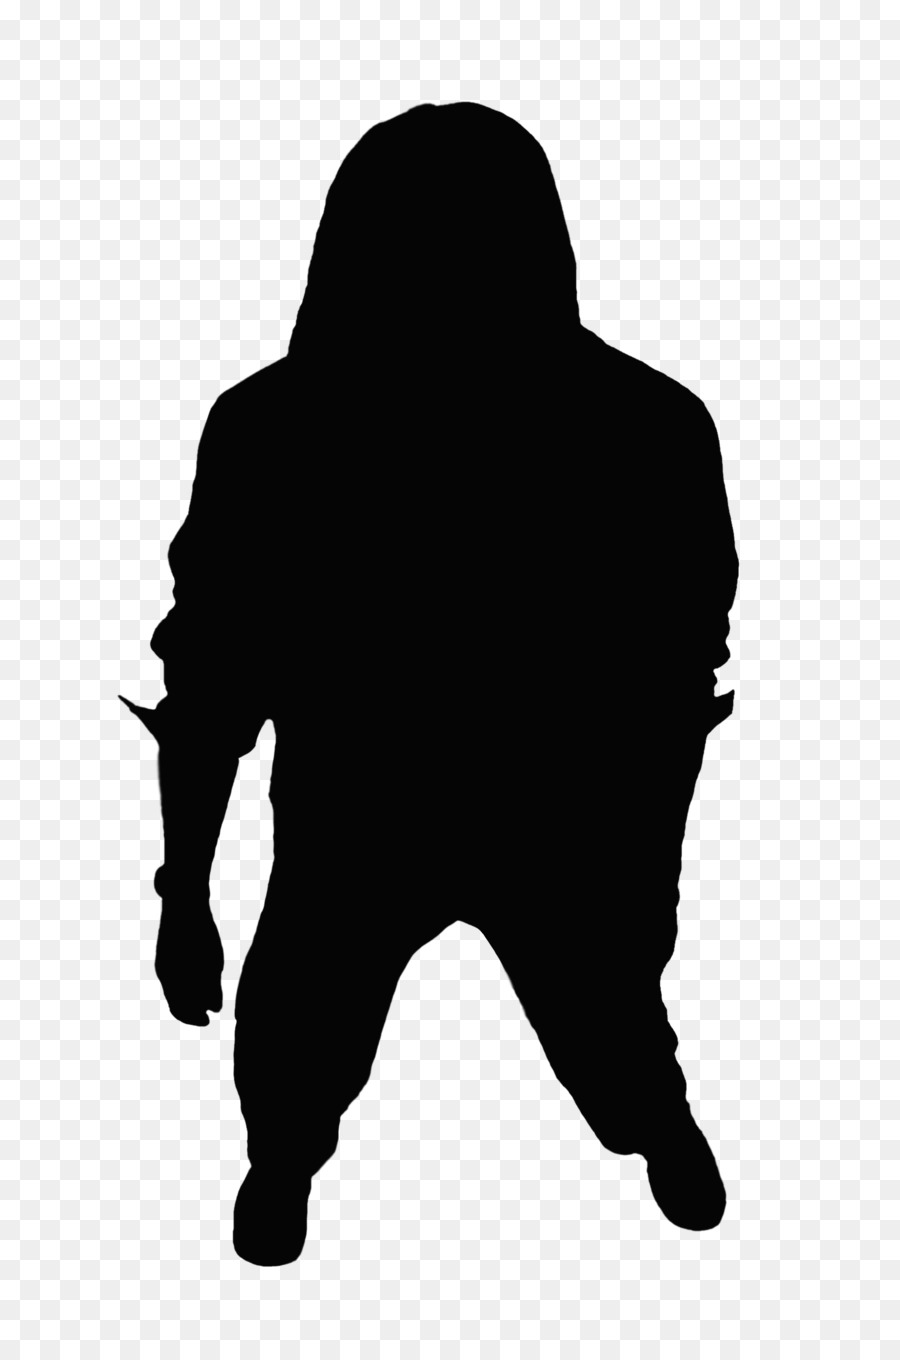 Silhouette Black - Silhouette png download - 3072*4608 - Free Transparent Silhouette png Download.